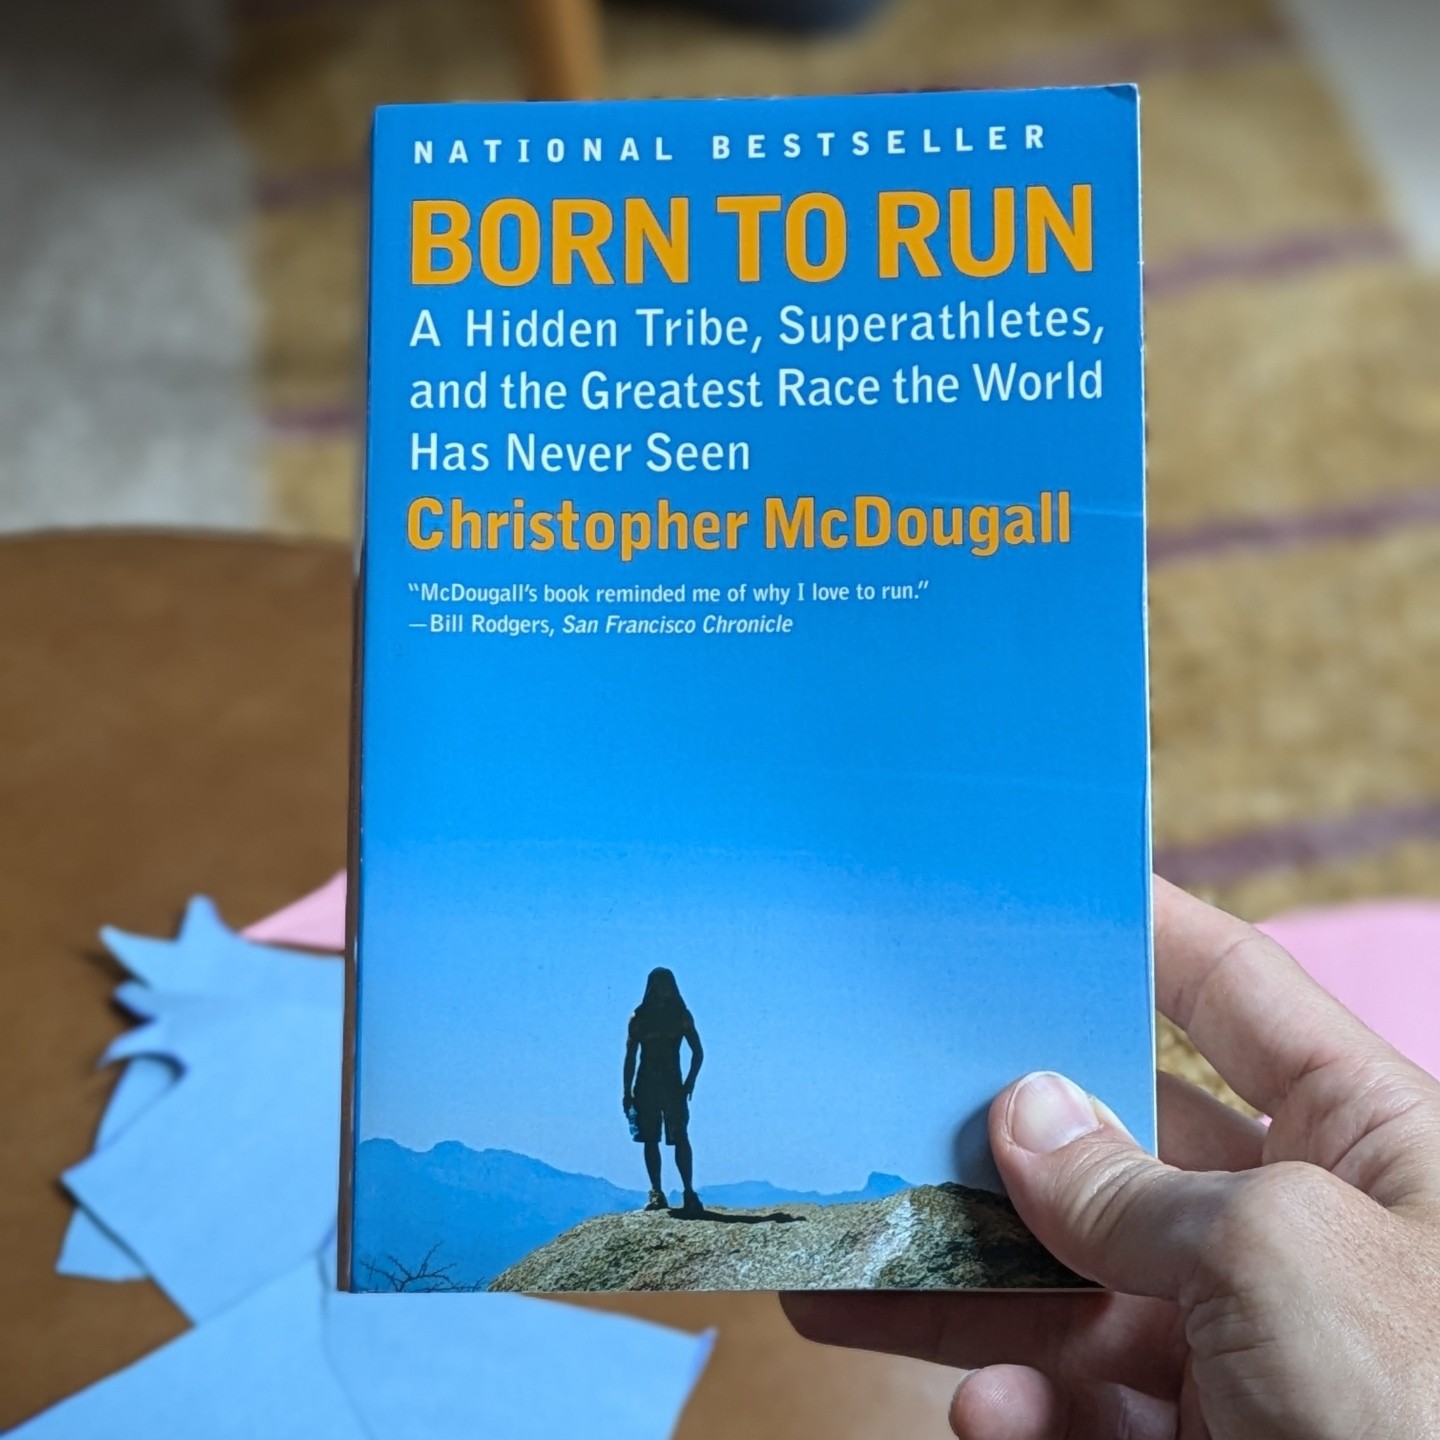 Cover for the book "Born to Run" by Christopher McDougall